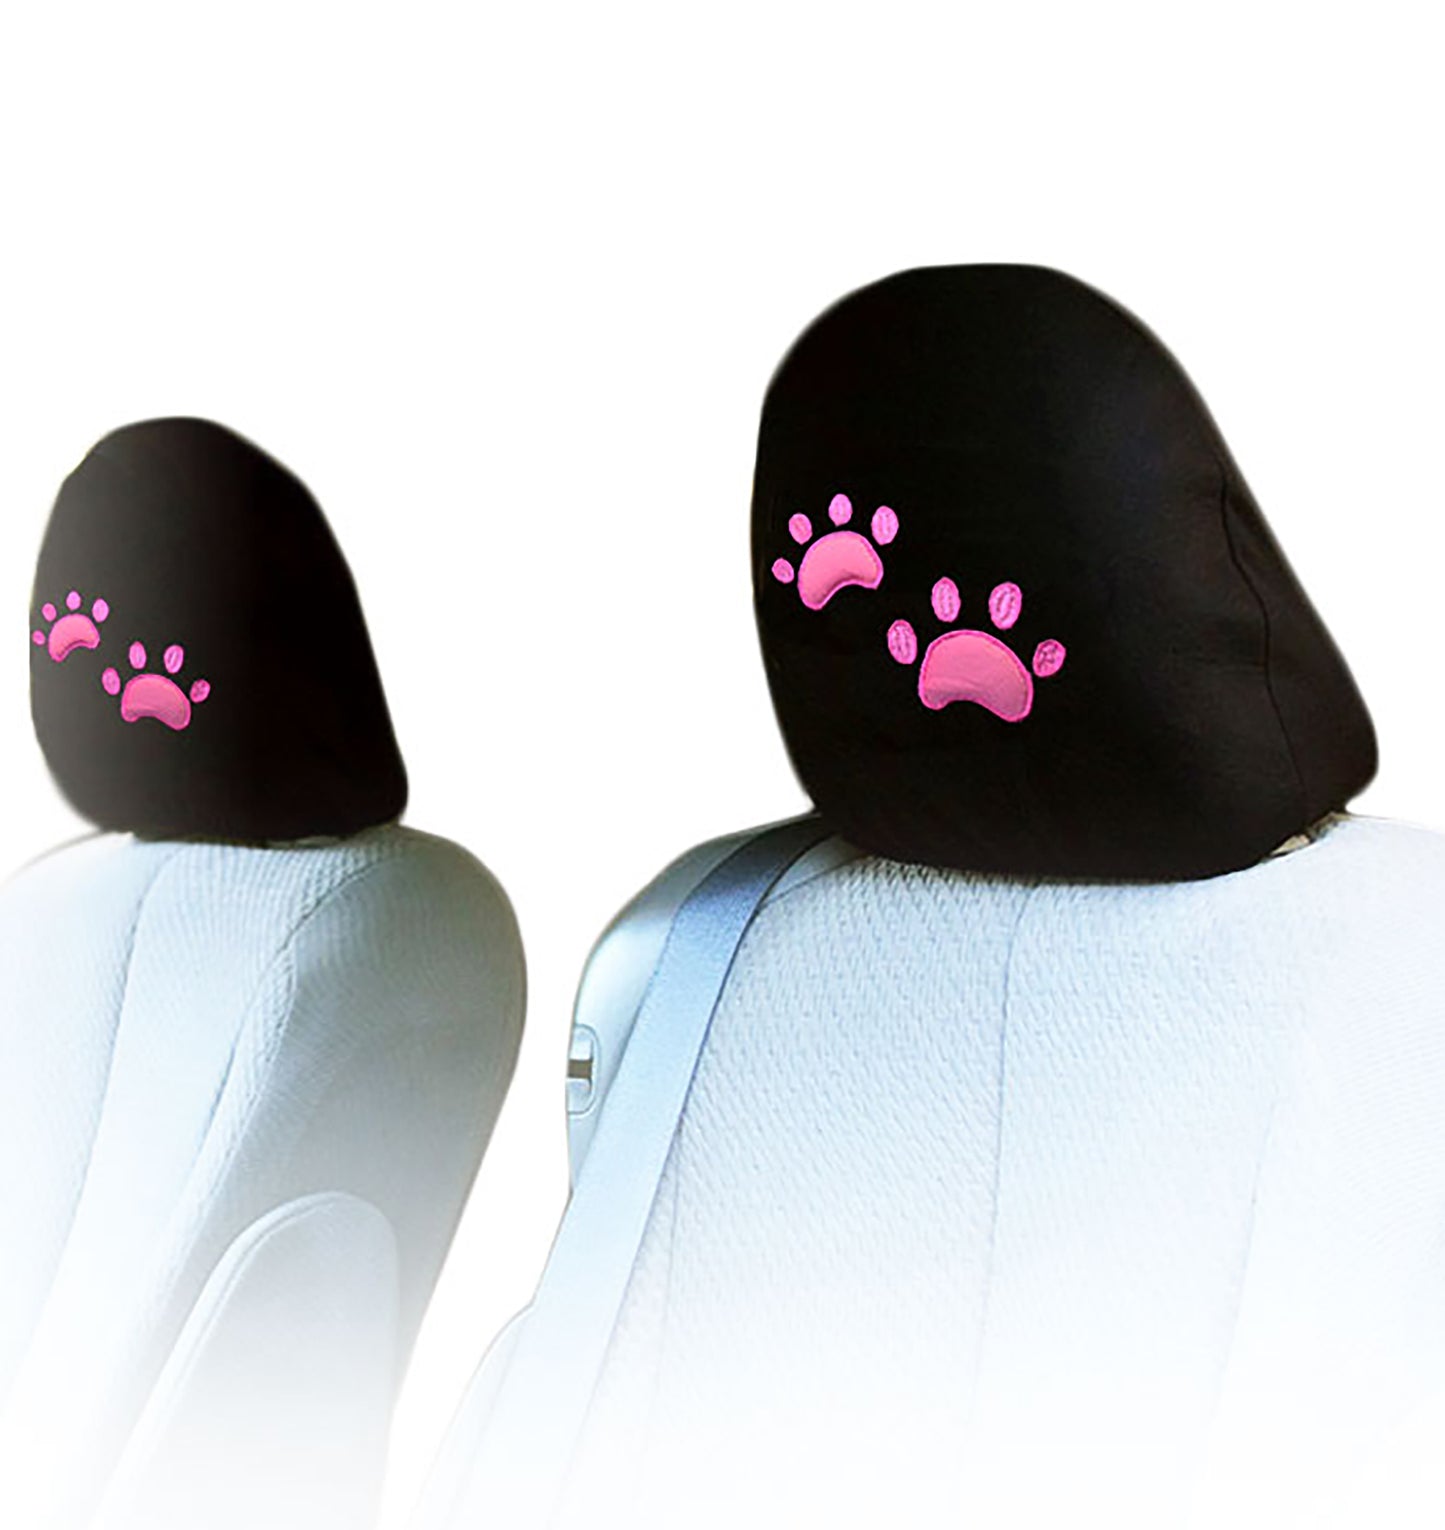 Embroidery Pink Paw Logo Design Auto Truck SUV Car Seat Headrest Cover Accessory 1 Pair - Yupbizauto